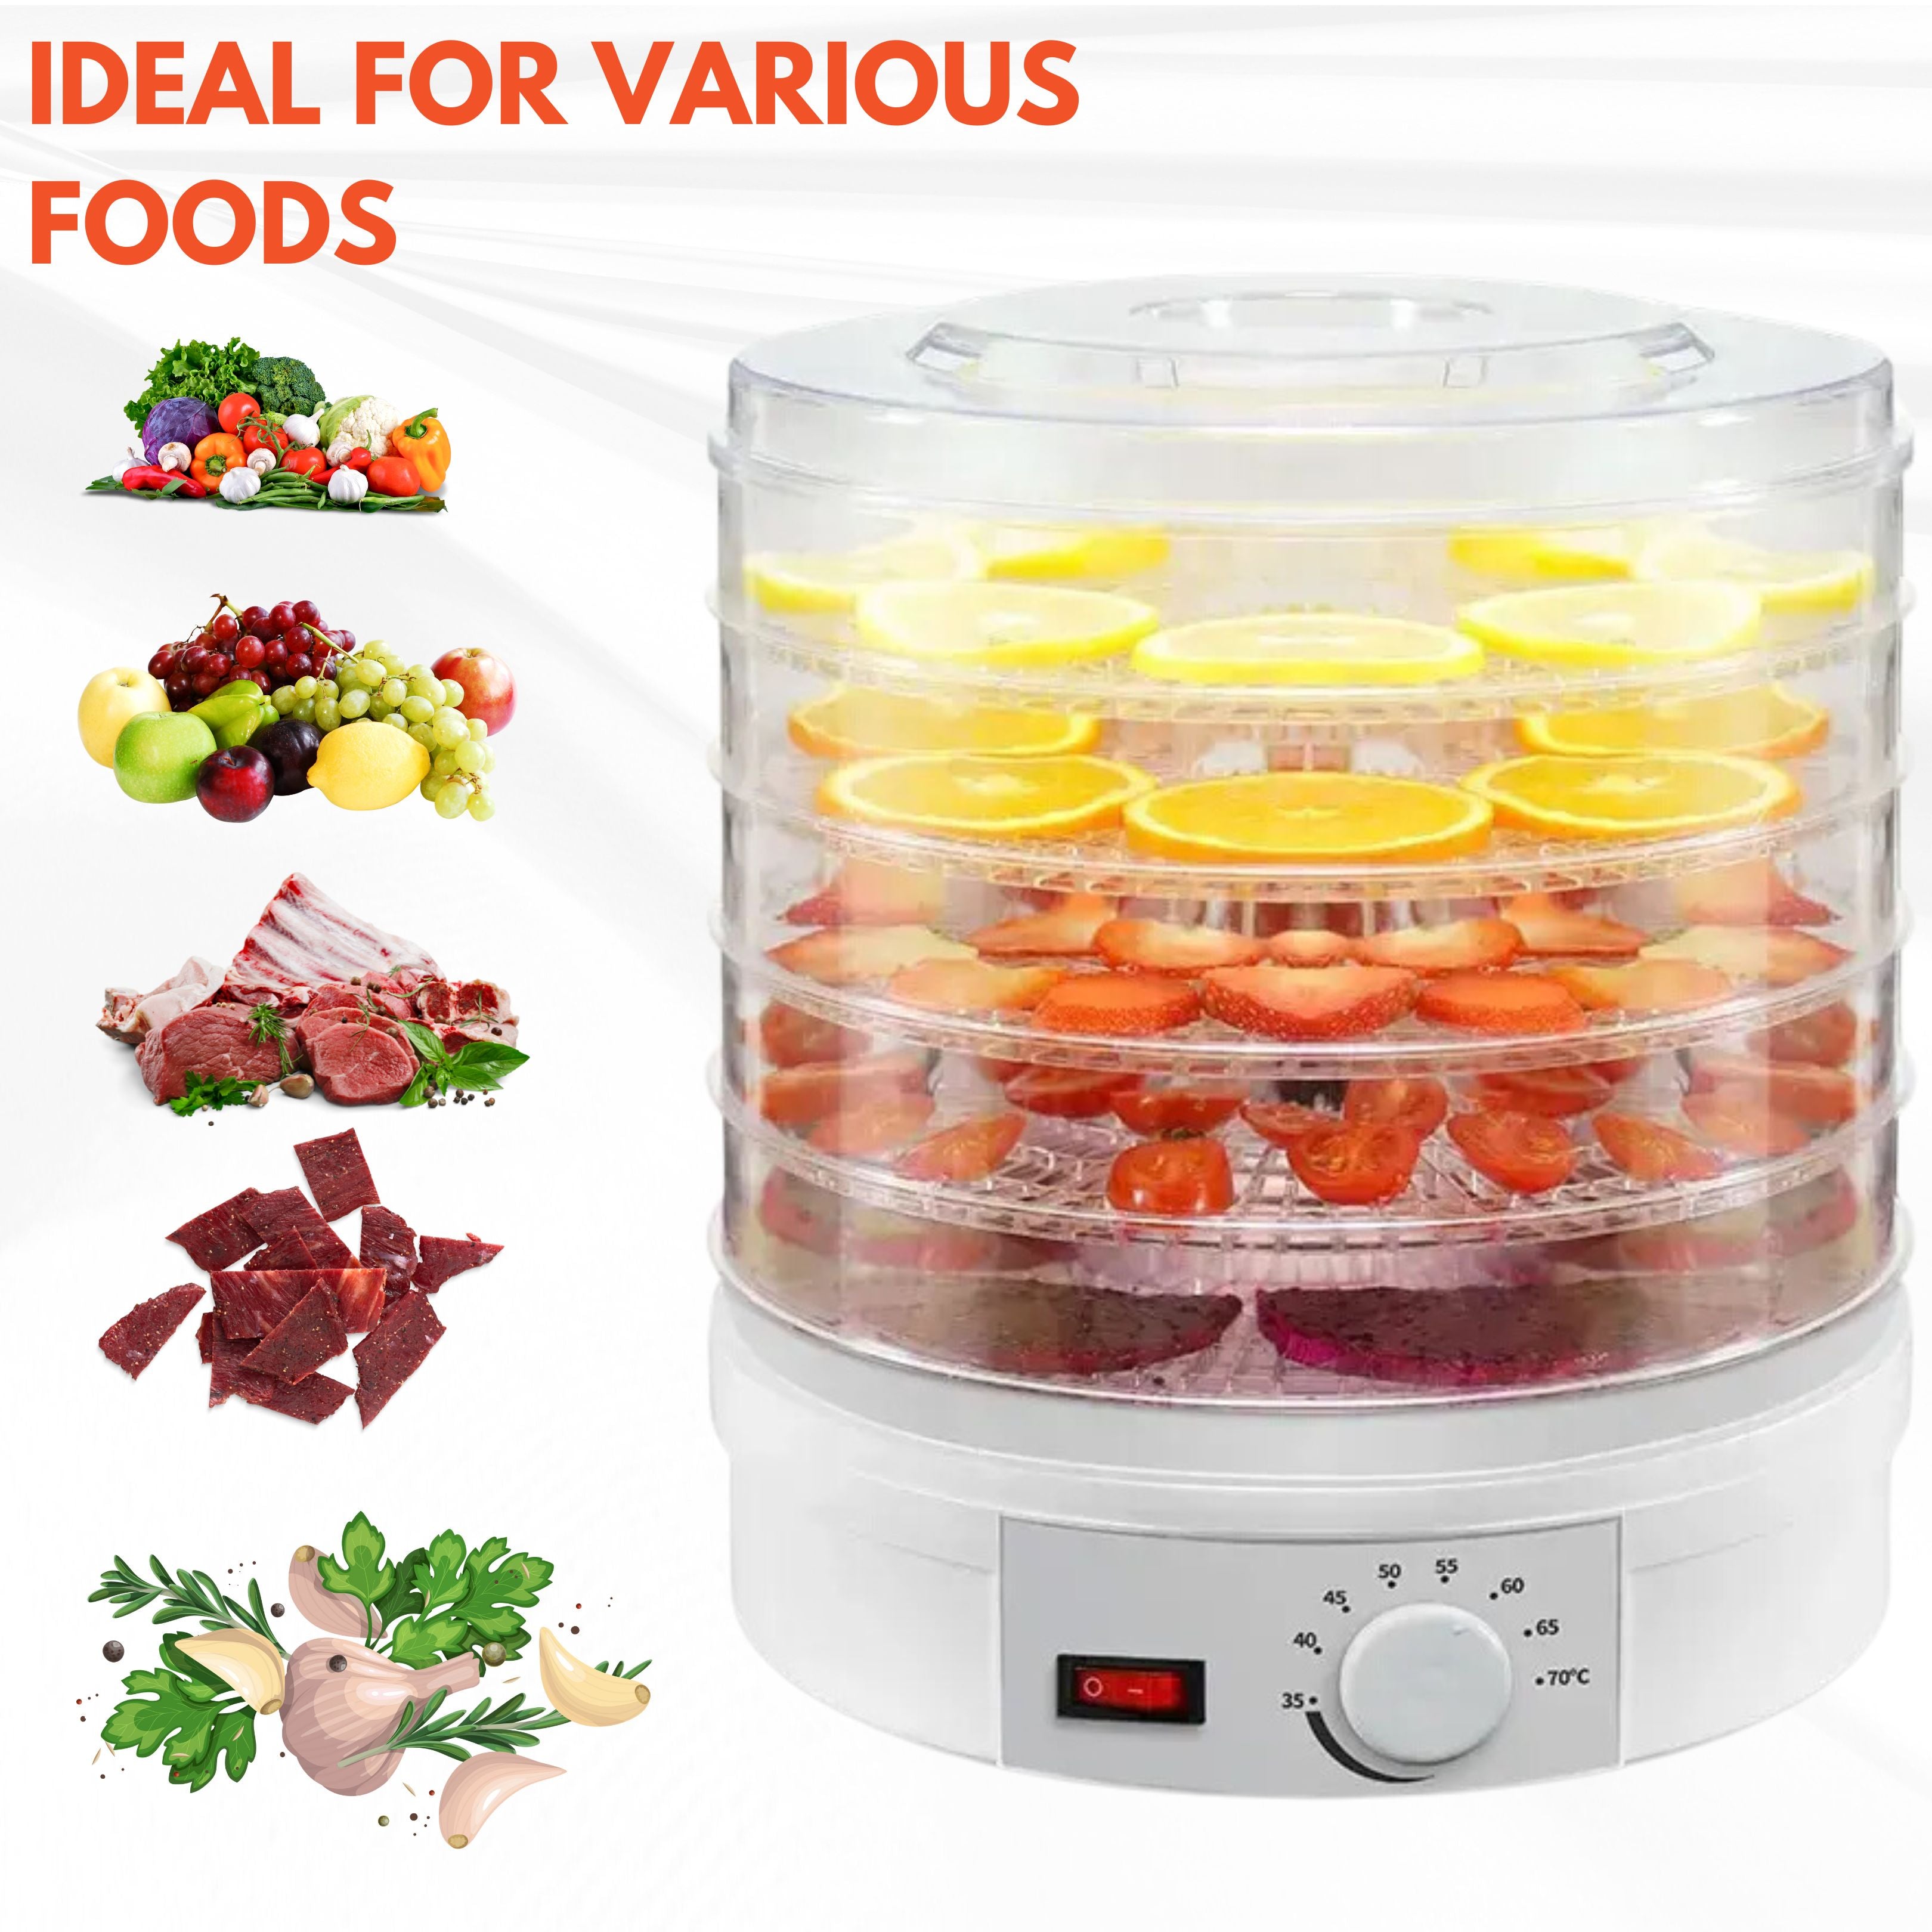 https://cdn.shopify.com/s/files/1/0494/4507/7148/files/5_Tier_Food_Dehydrator_White_Food_Dryer_Machine_with_Adjustable_Temperature_Control_for_Drying_Fruit_Meat_Vegetable_Multifunction_Kitchen_Dehydrator_Machine_6.jpg?v=1690471204